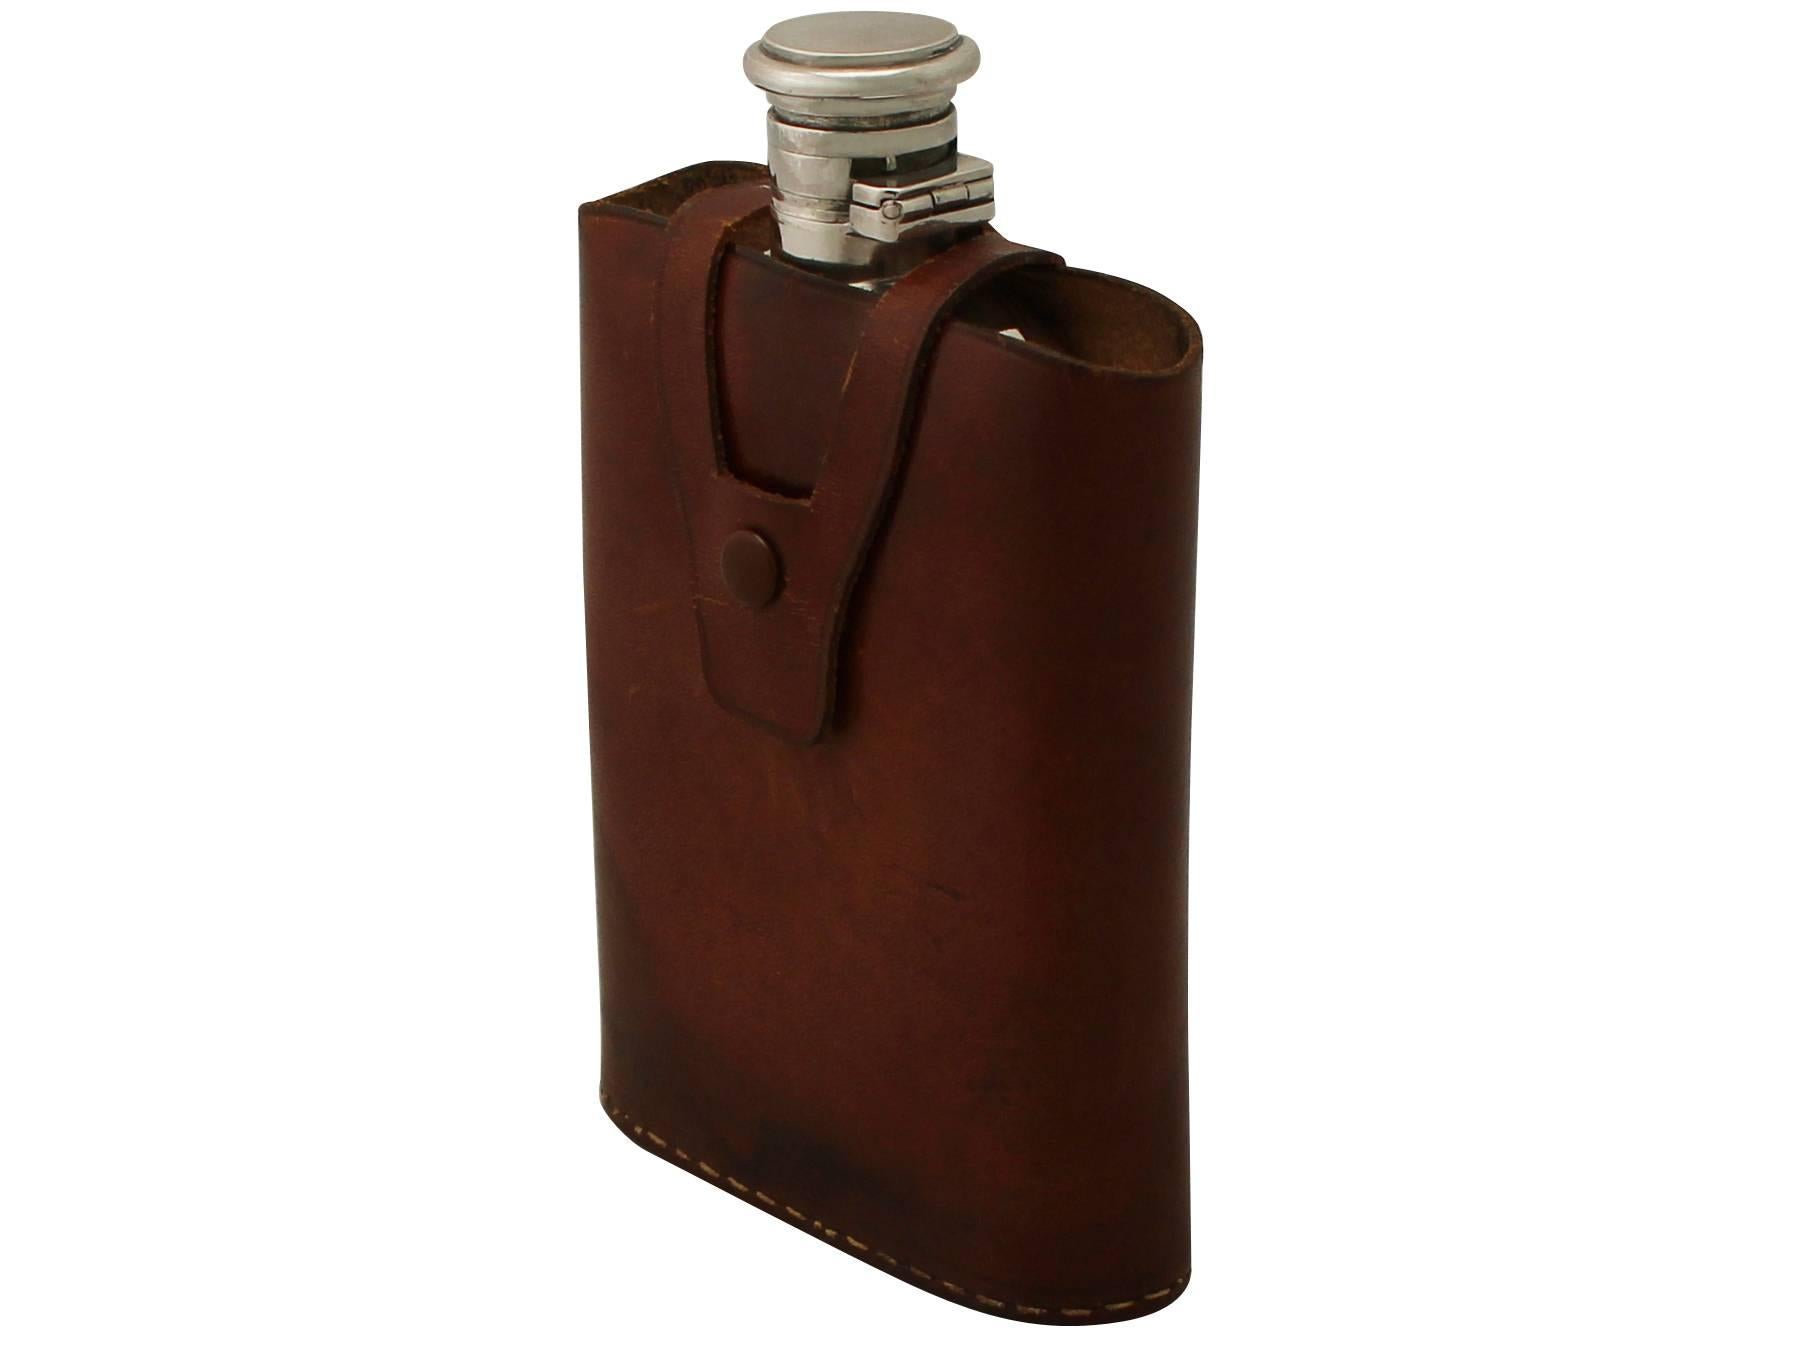 An exceptional, fine and impressive antique Indian 900 standard silver hip flask with the original leather case; part of our wine and drinks related silverware collection.

This exceptional antique Indian 900 standard silver hip flask has an oval